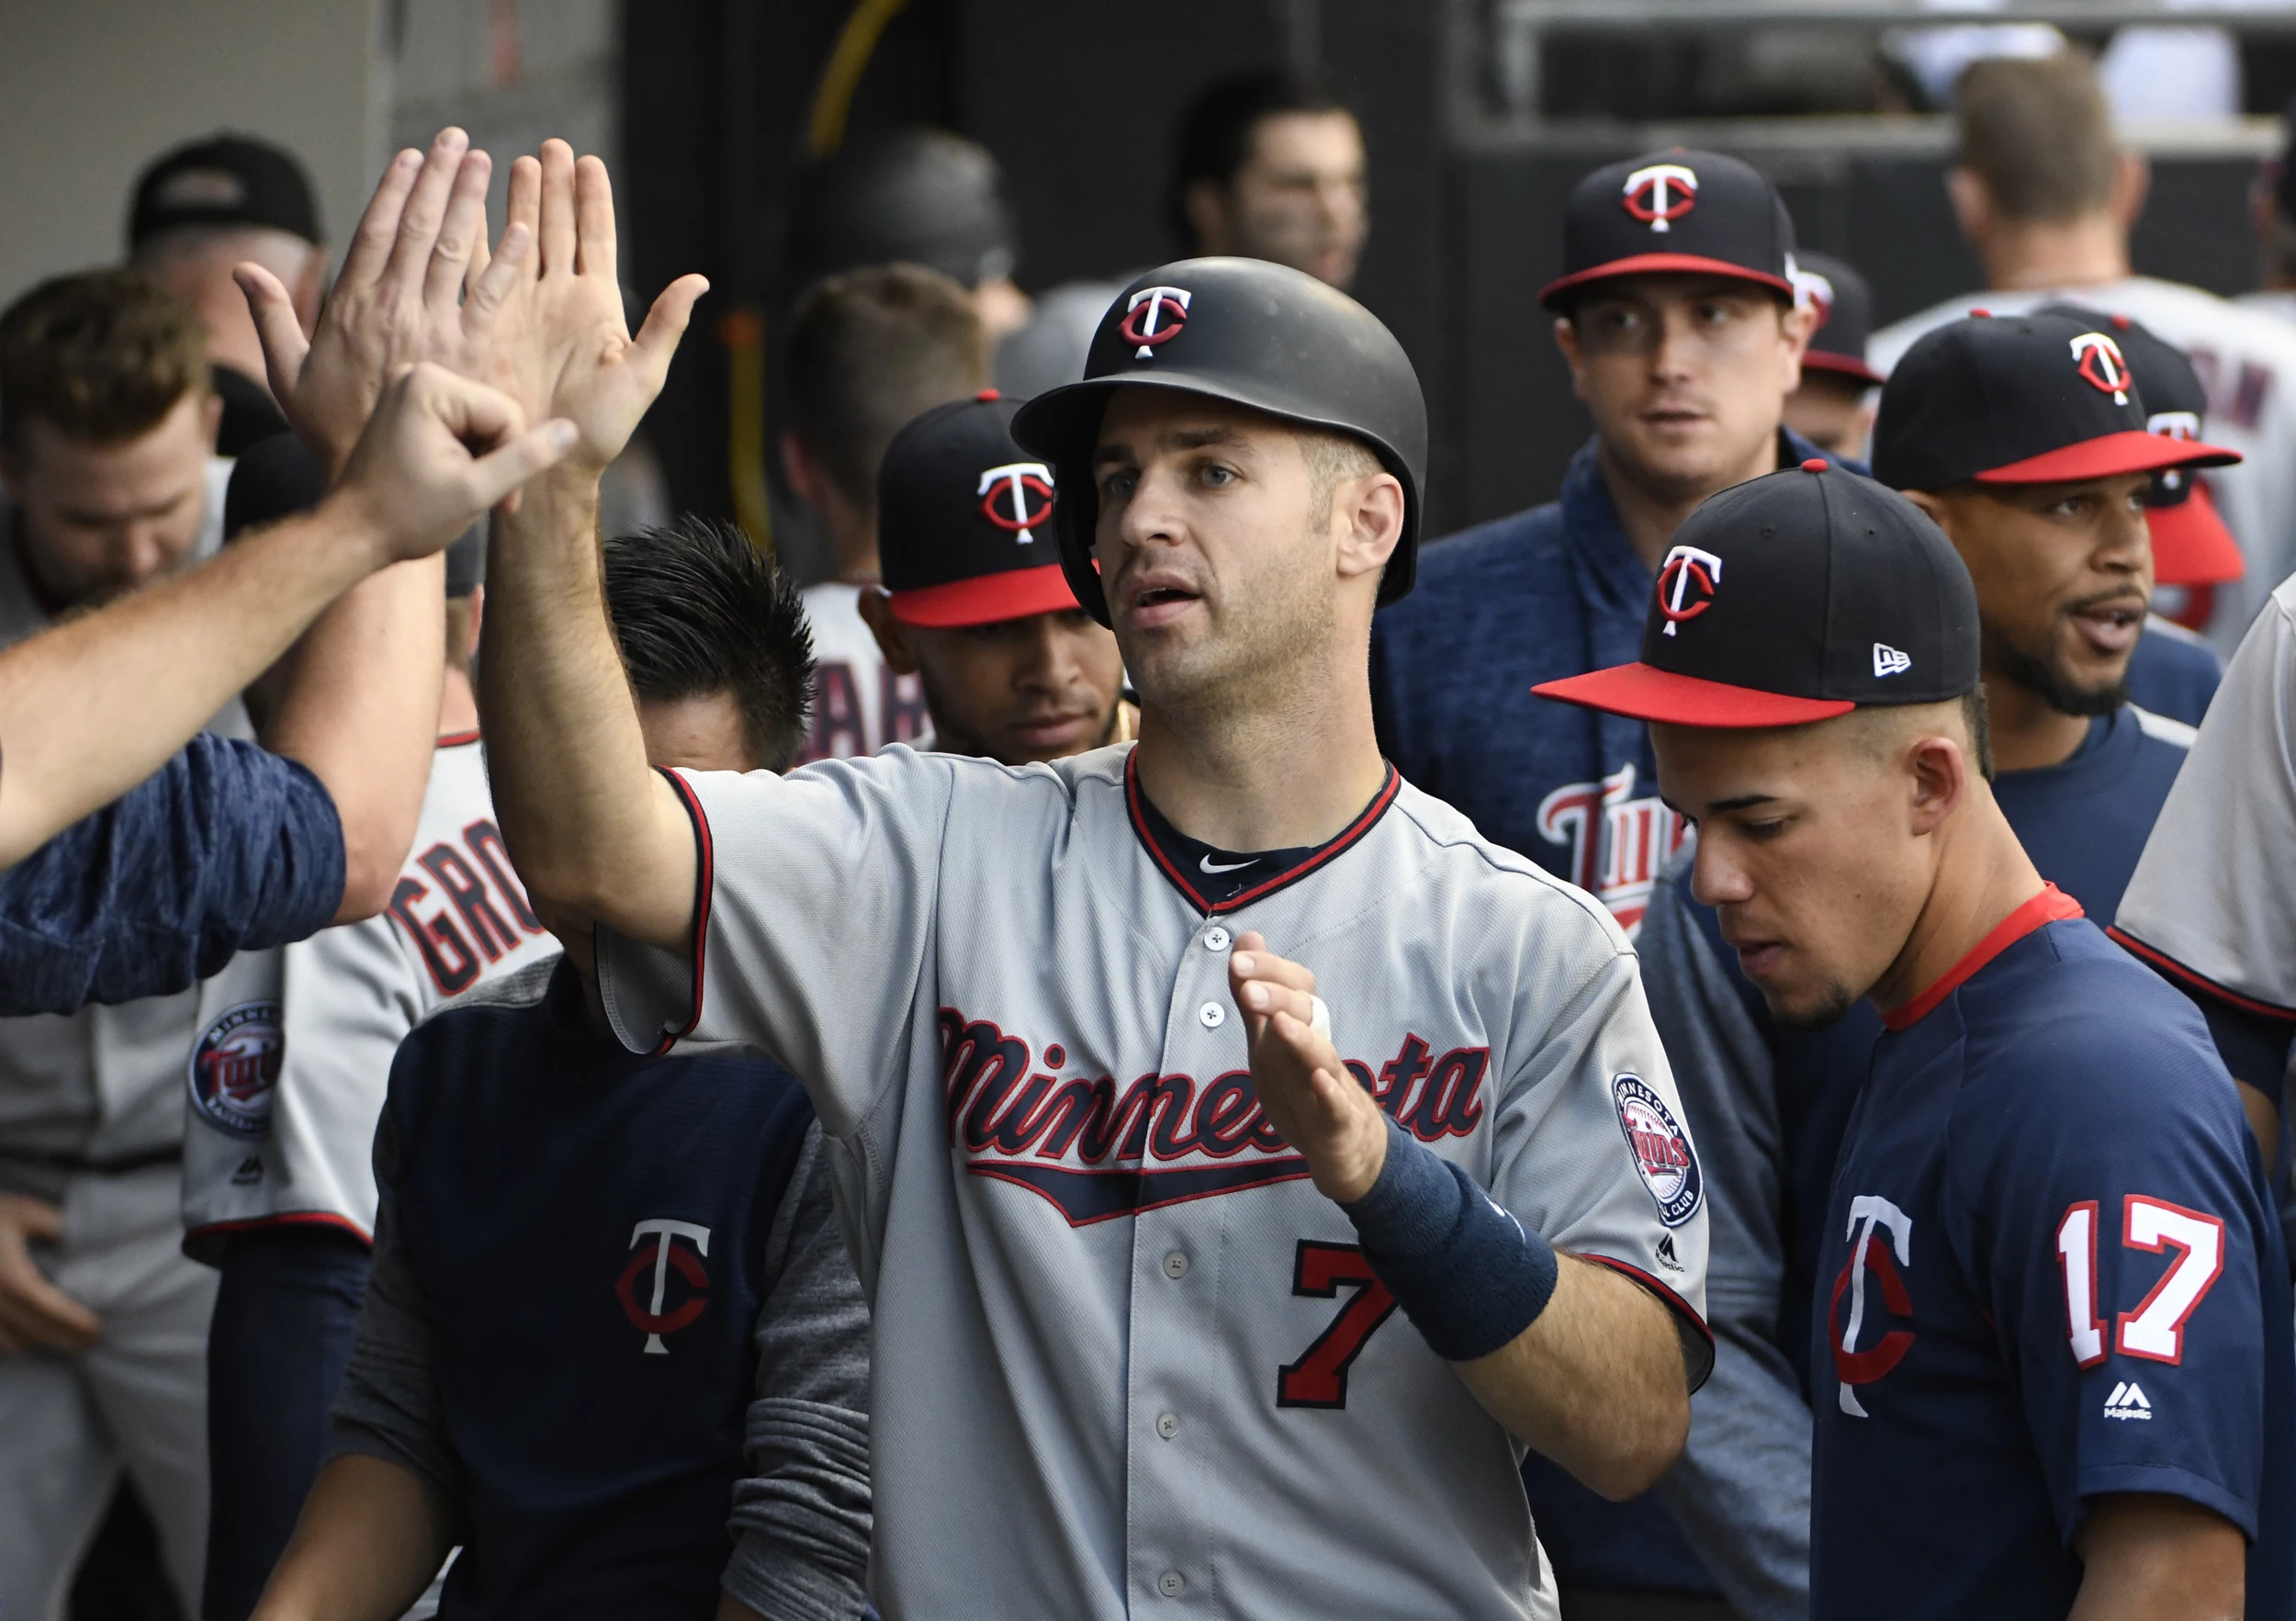 Joe Mauer's Jersey Retirement is a Reminder of His Greatness, the